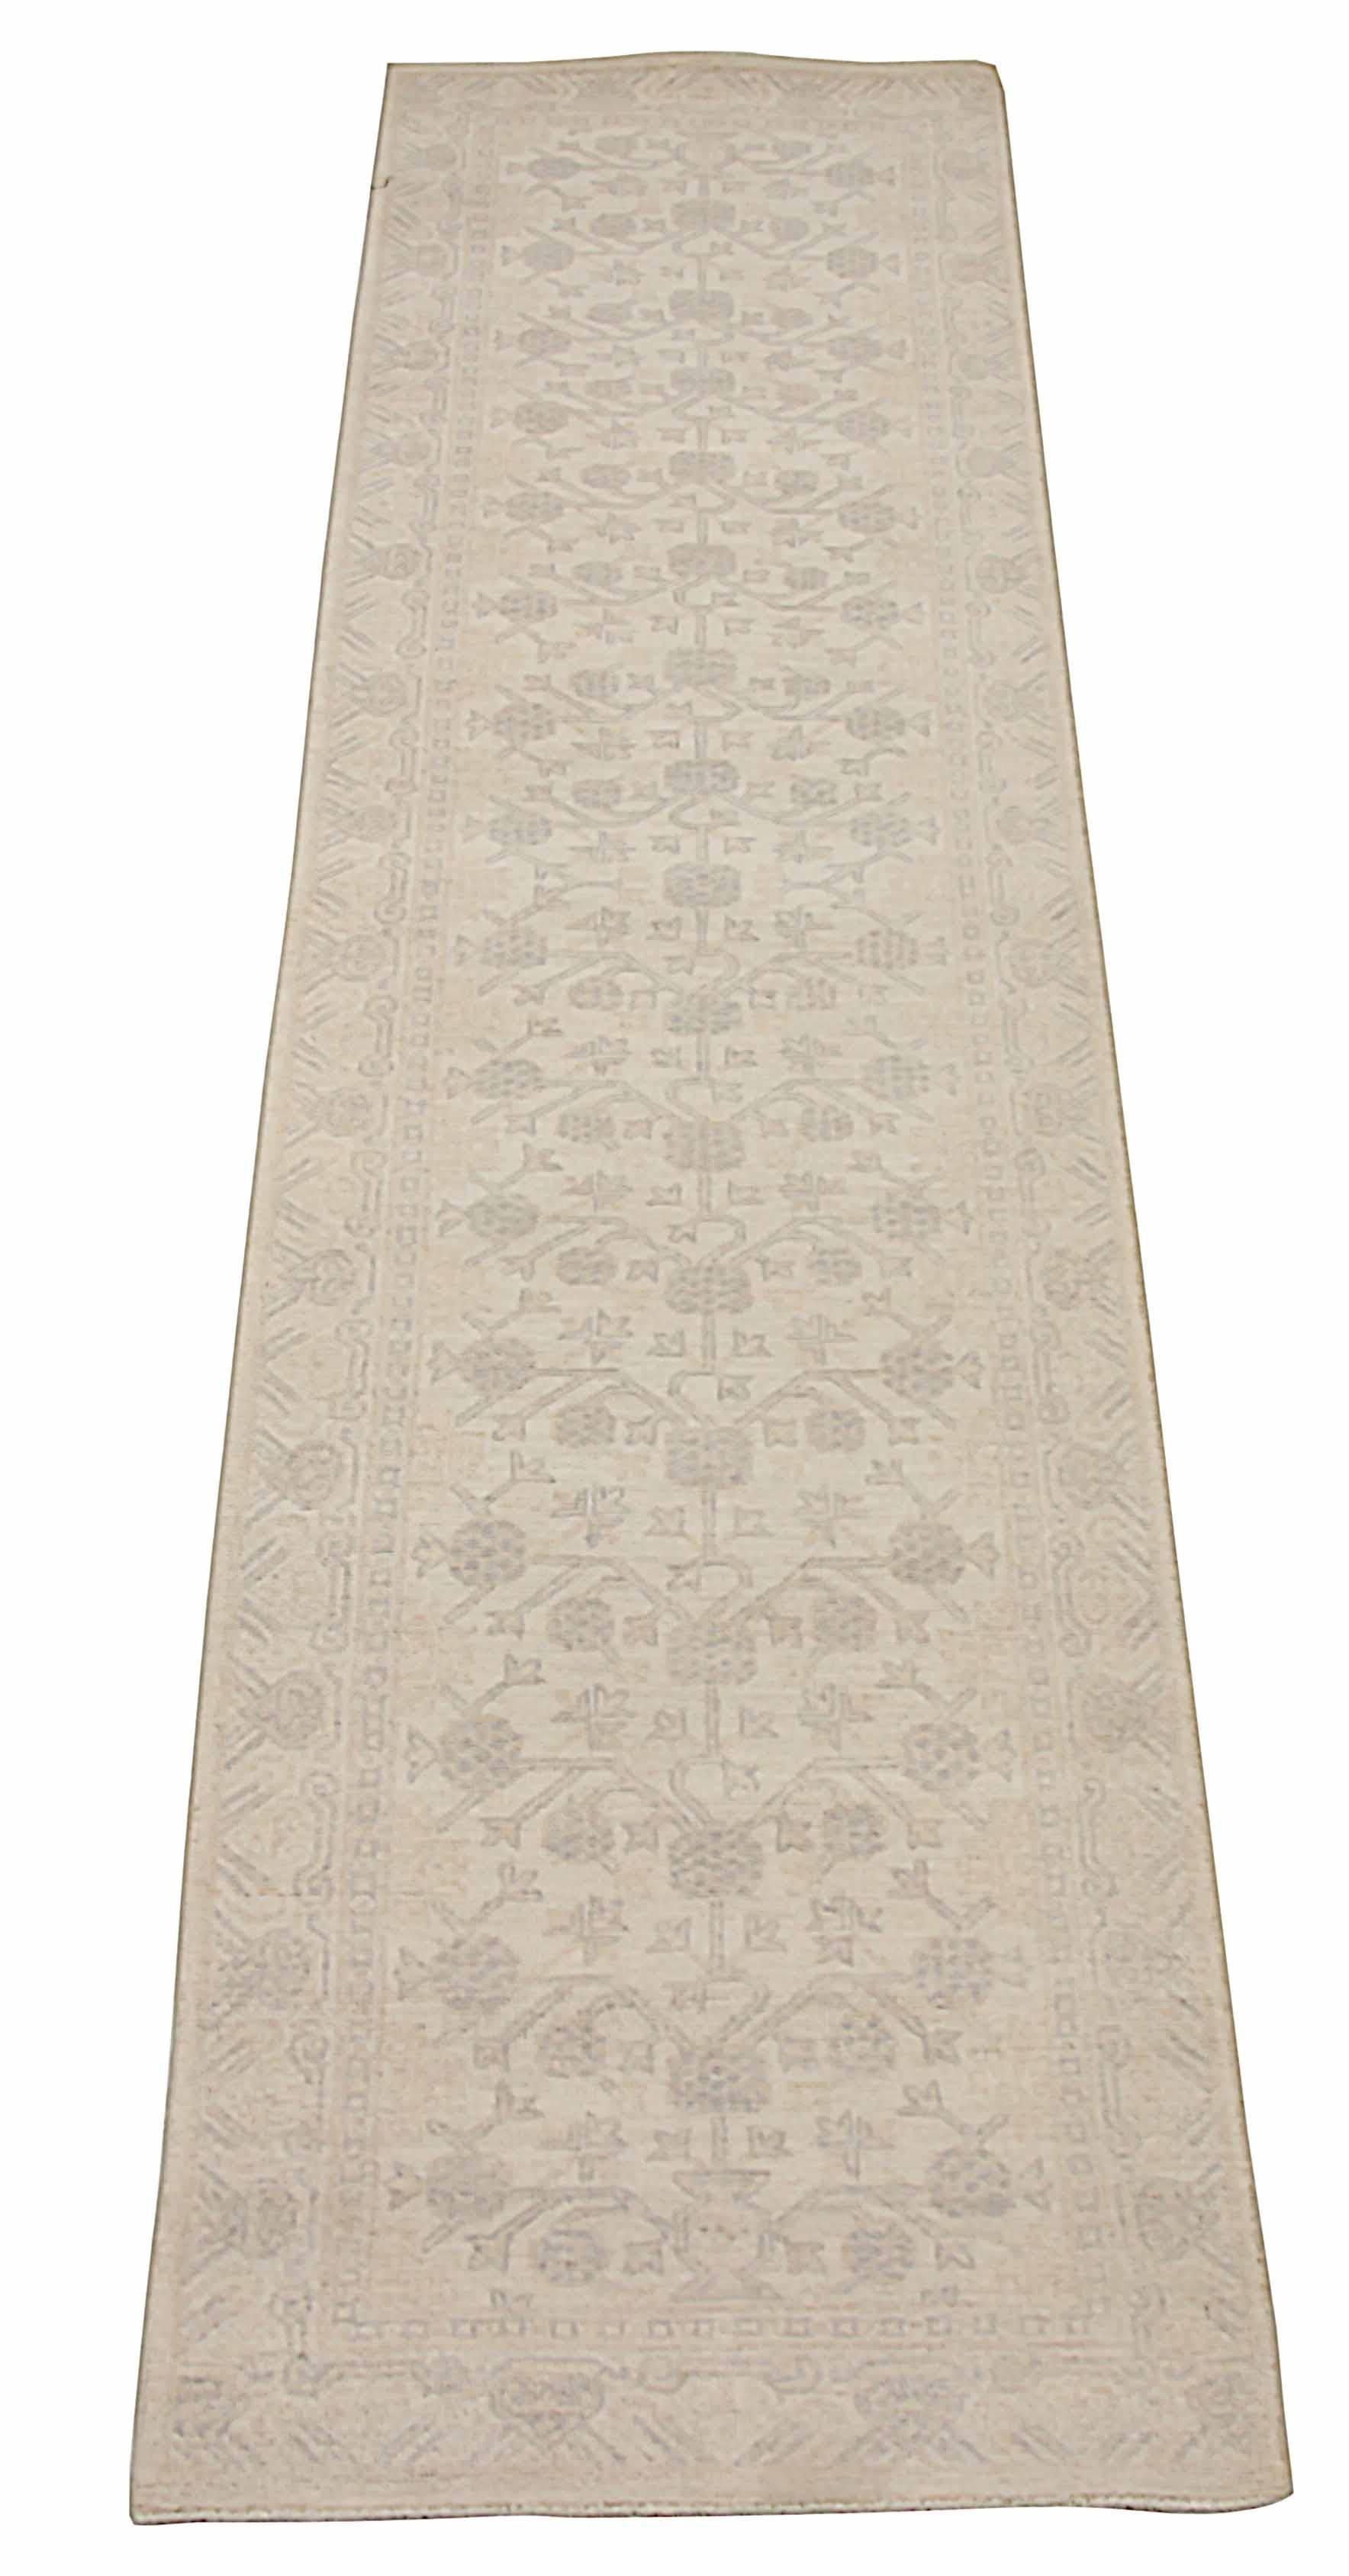 New Afghan area rug handwoven from the finest sheep’s wool. It’s colored with all-natural vegetable dyes that are safe for humans and pets. It’s a traditional Khotan design woven by expert artisans. In addition to the fine weaving, this rug